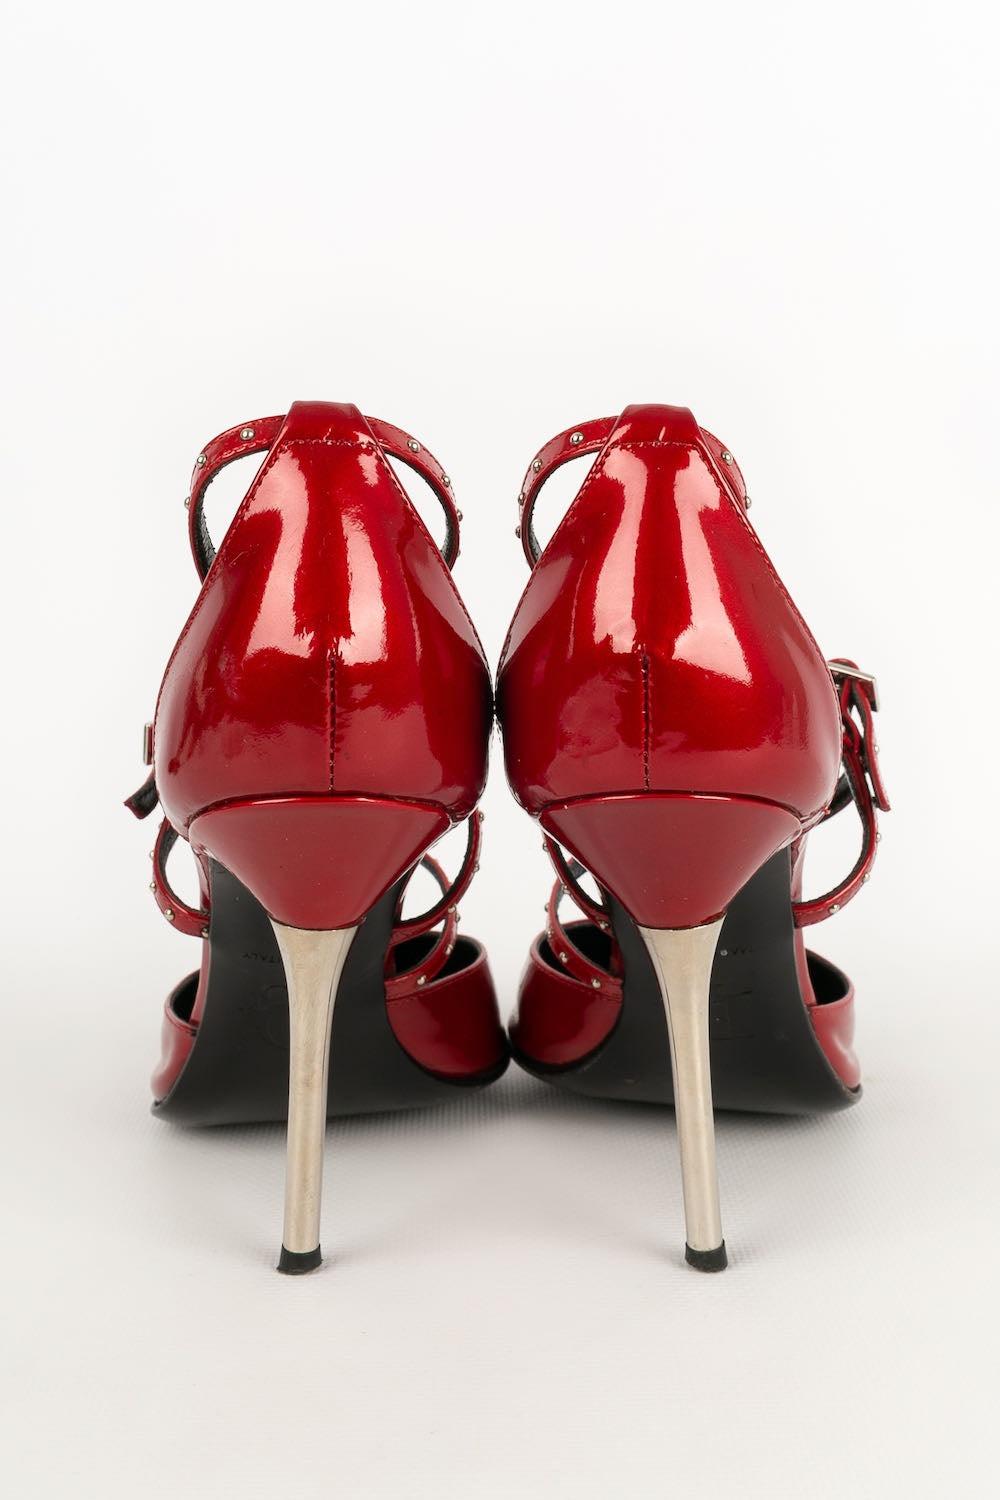 Women's Dior Leather Pumps in Red Leather Pumps For Sale